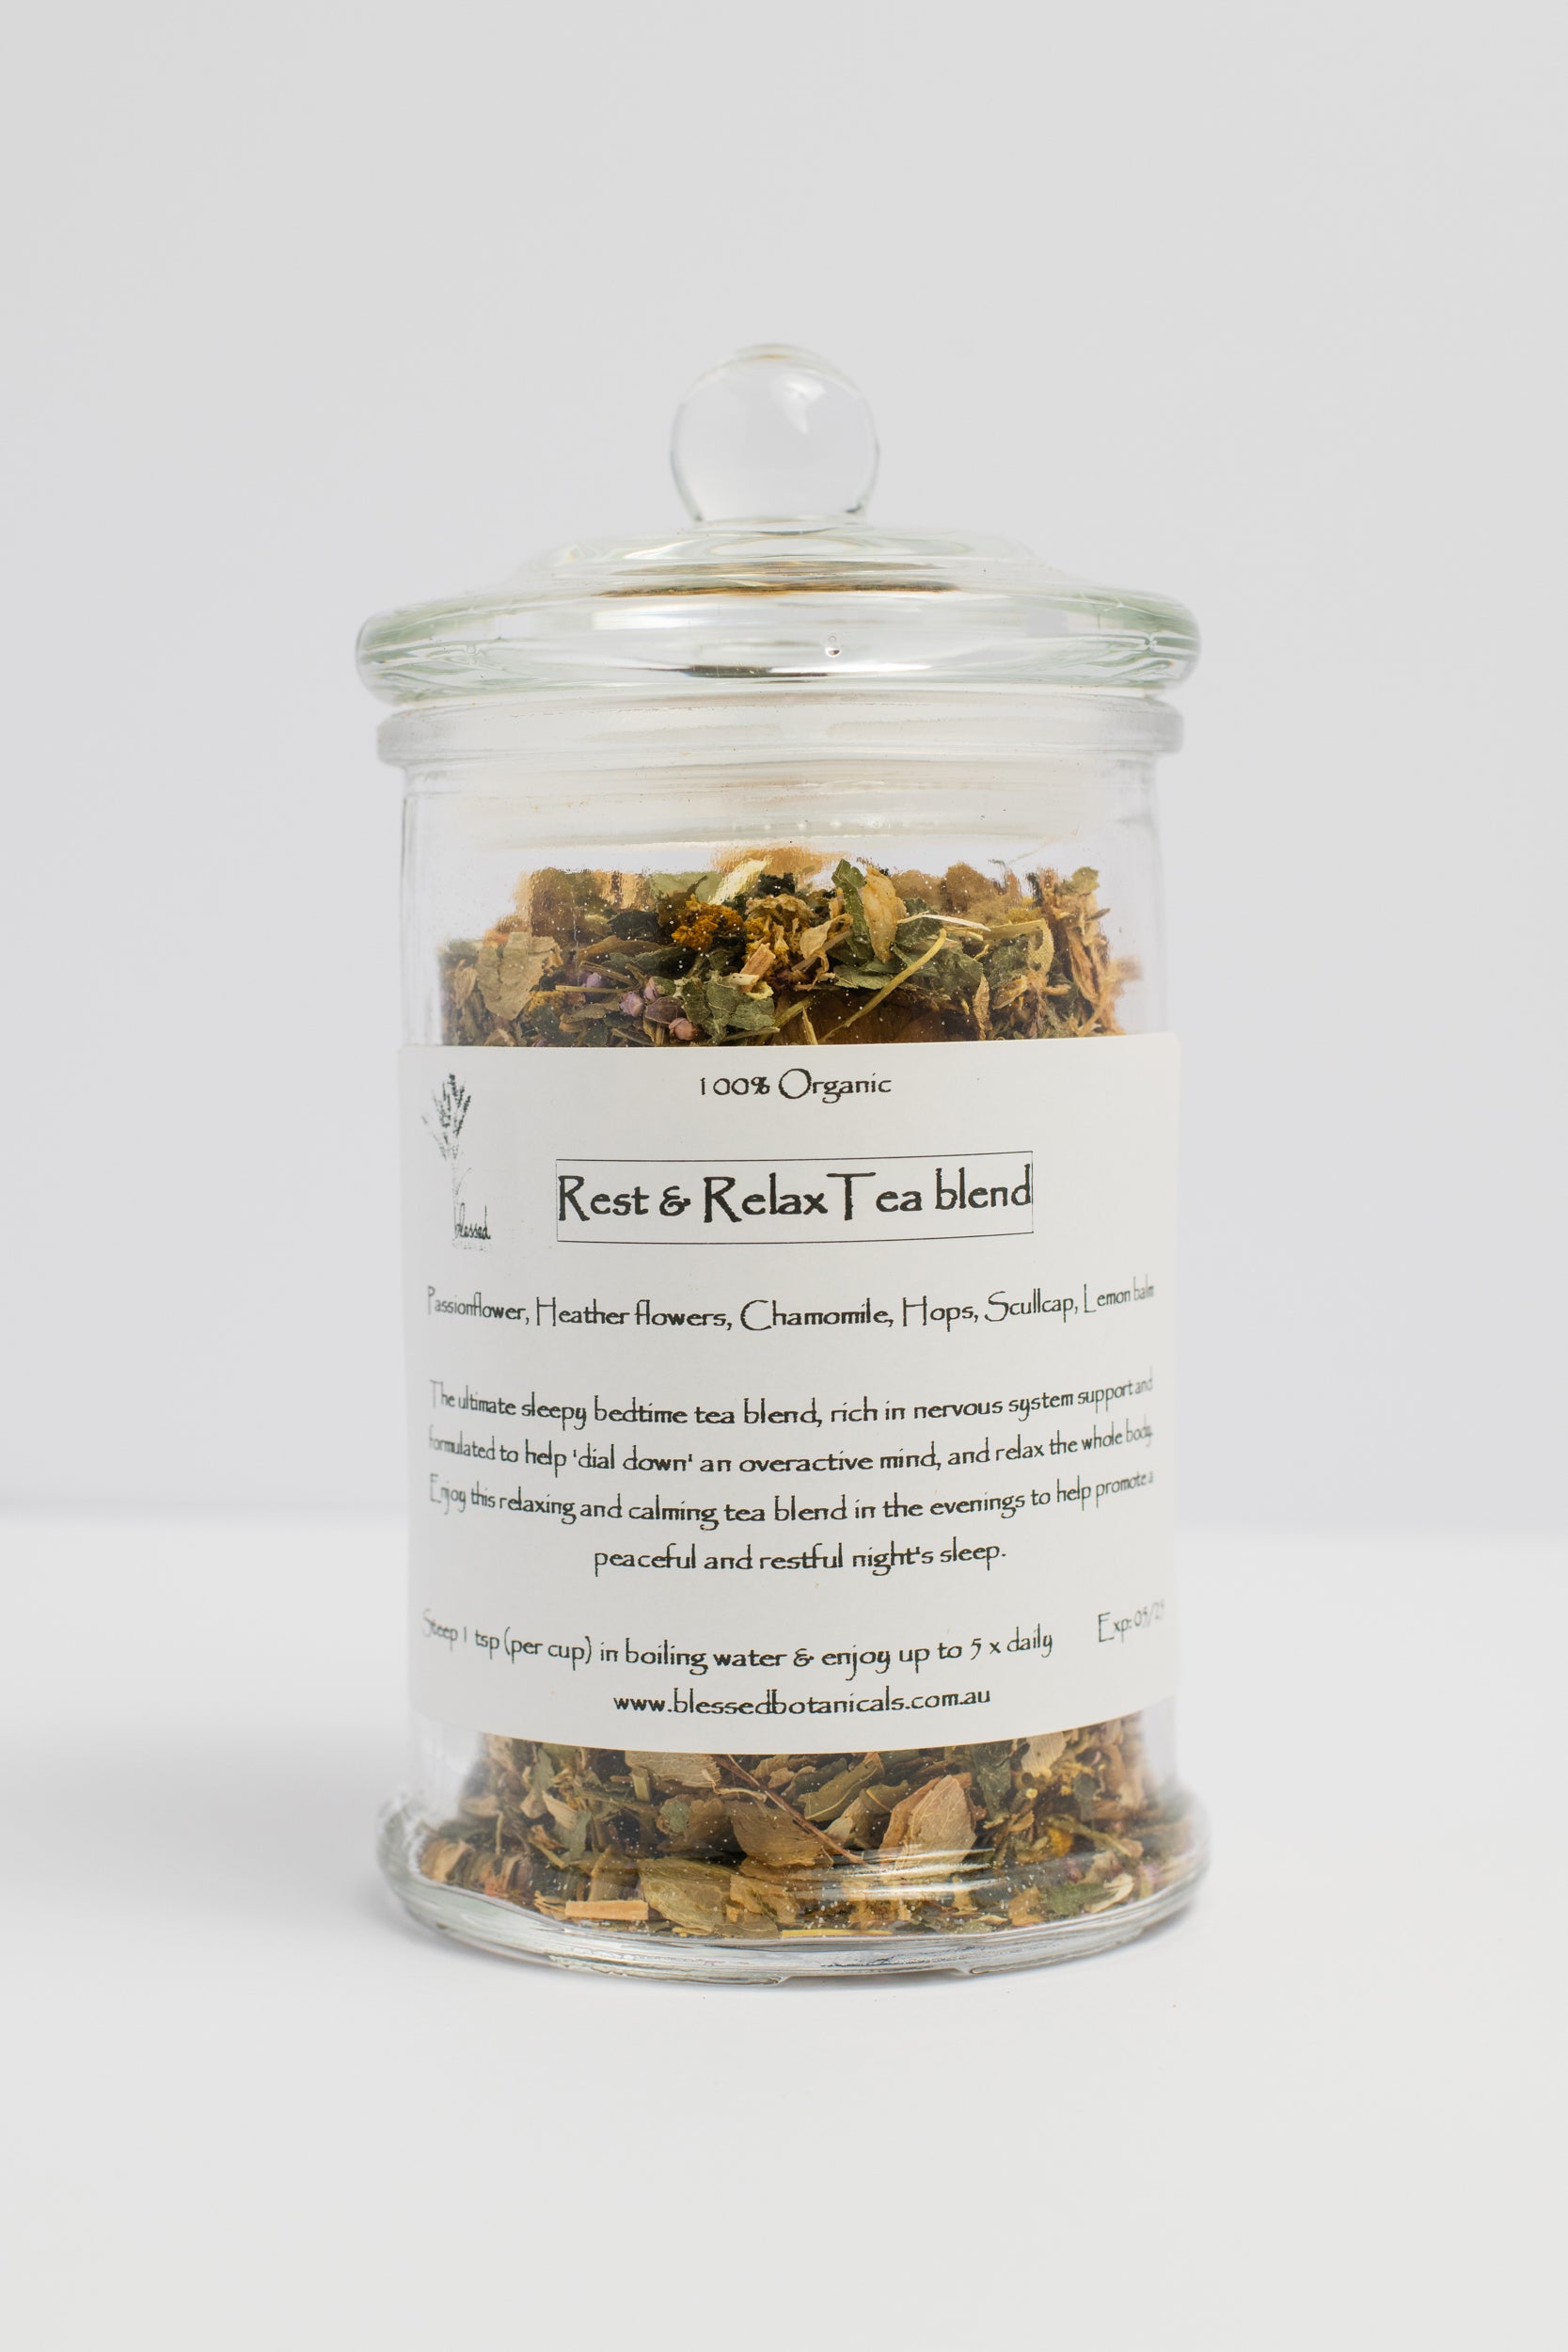 bespoke herbal tea, infusion, tissane, small batch, bespoke, artisan, dried herbs, herbal medicine, made to order, tailor made, organic, calm, loose leaf tea. Passionflower, Heather flowers, Chamomile, Hops, Scullcap, Lemon Balm. Rest, relax, sleep, insomnia, calming, relaxation, sleepy tea, bedtime tea, calm the mind.